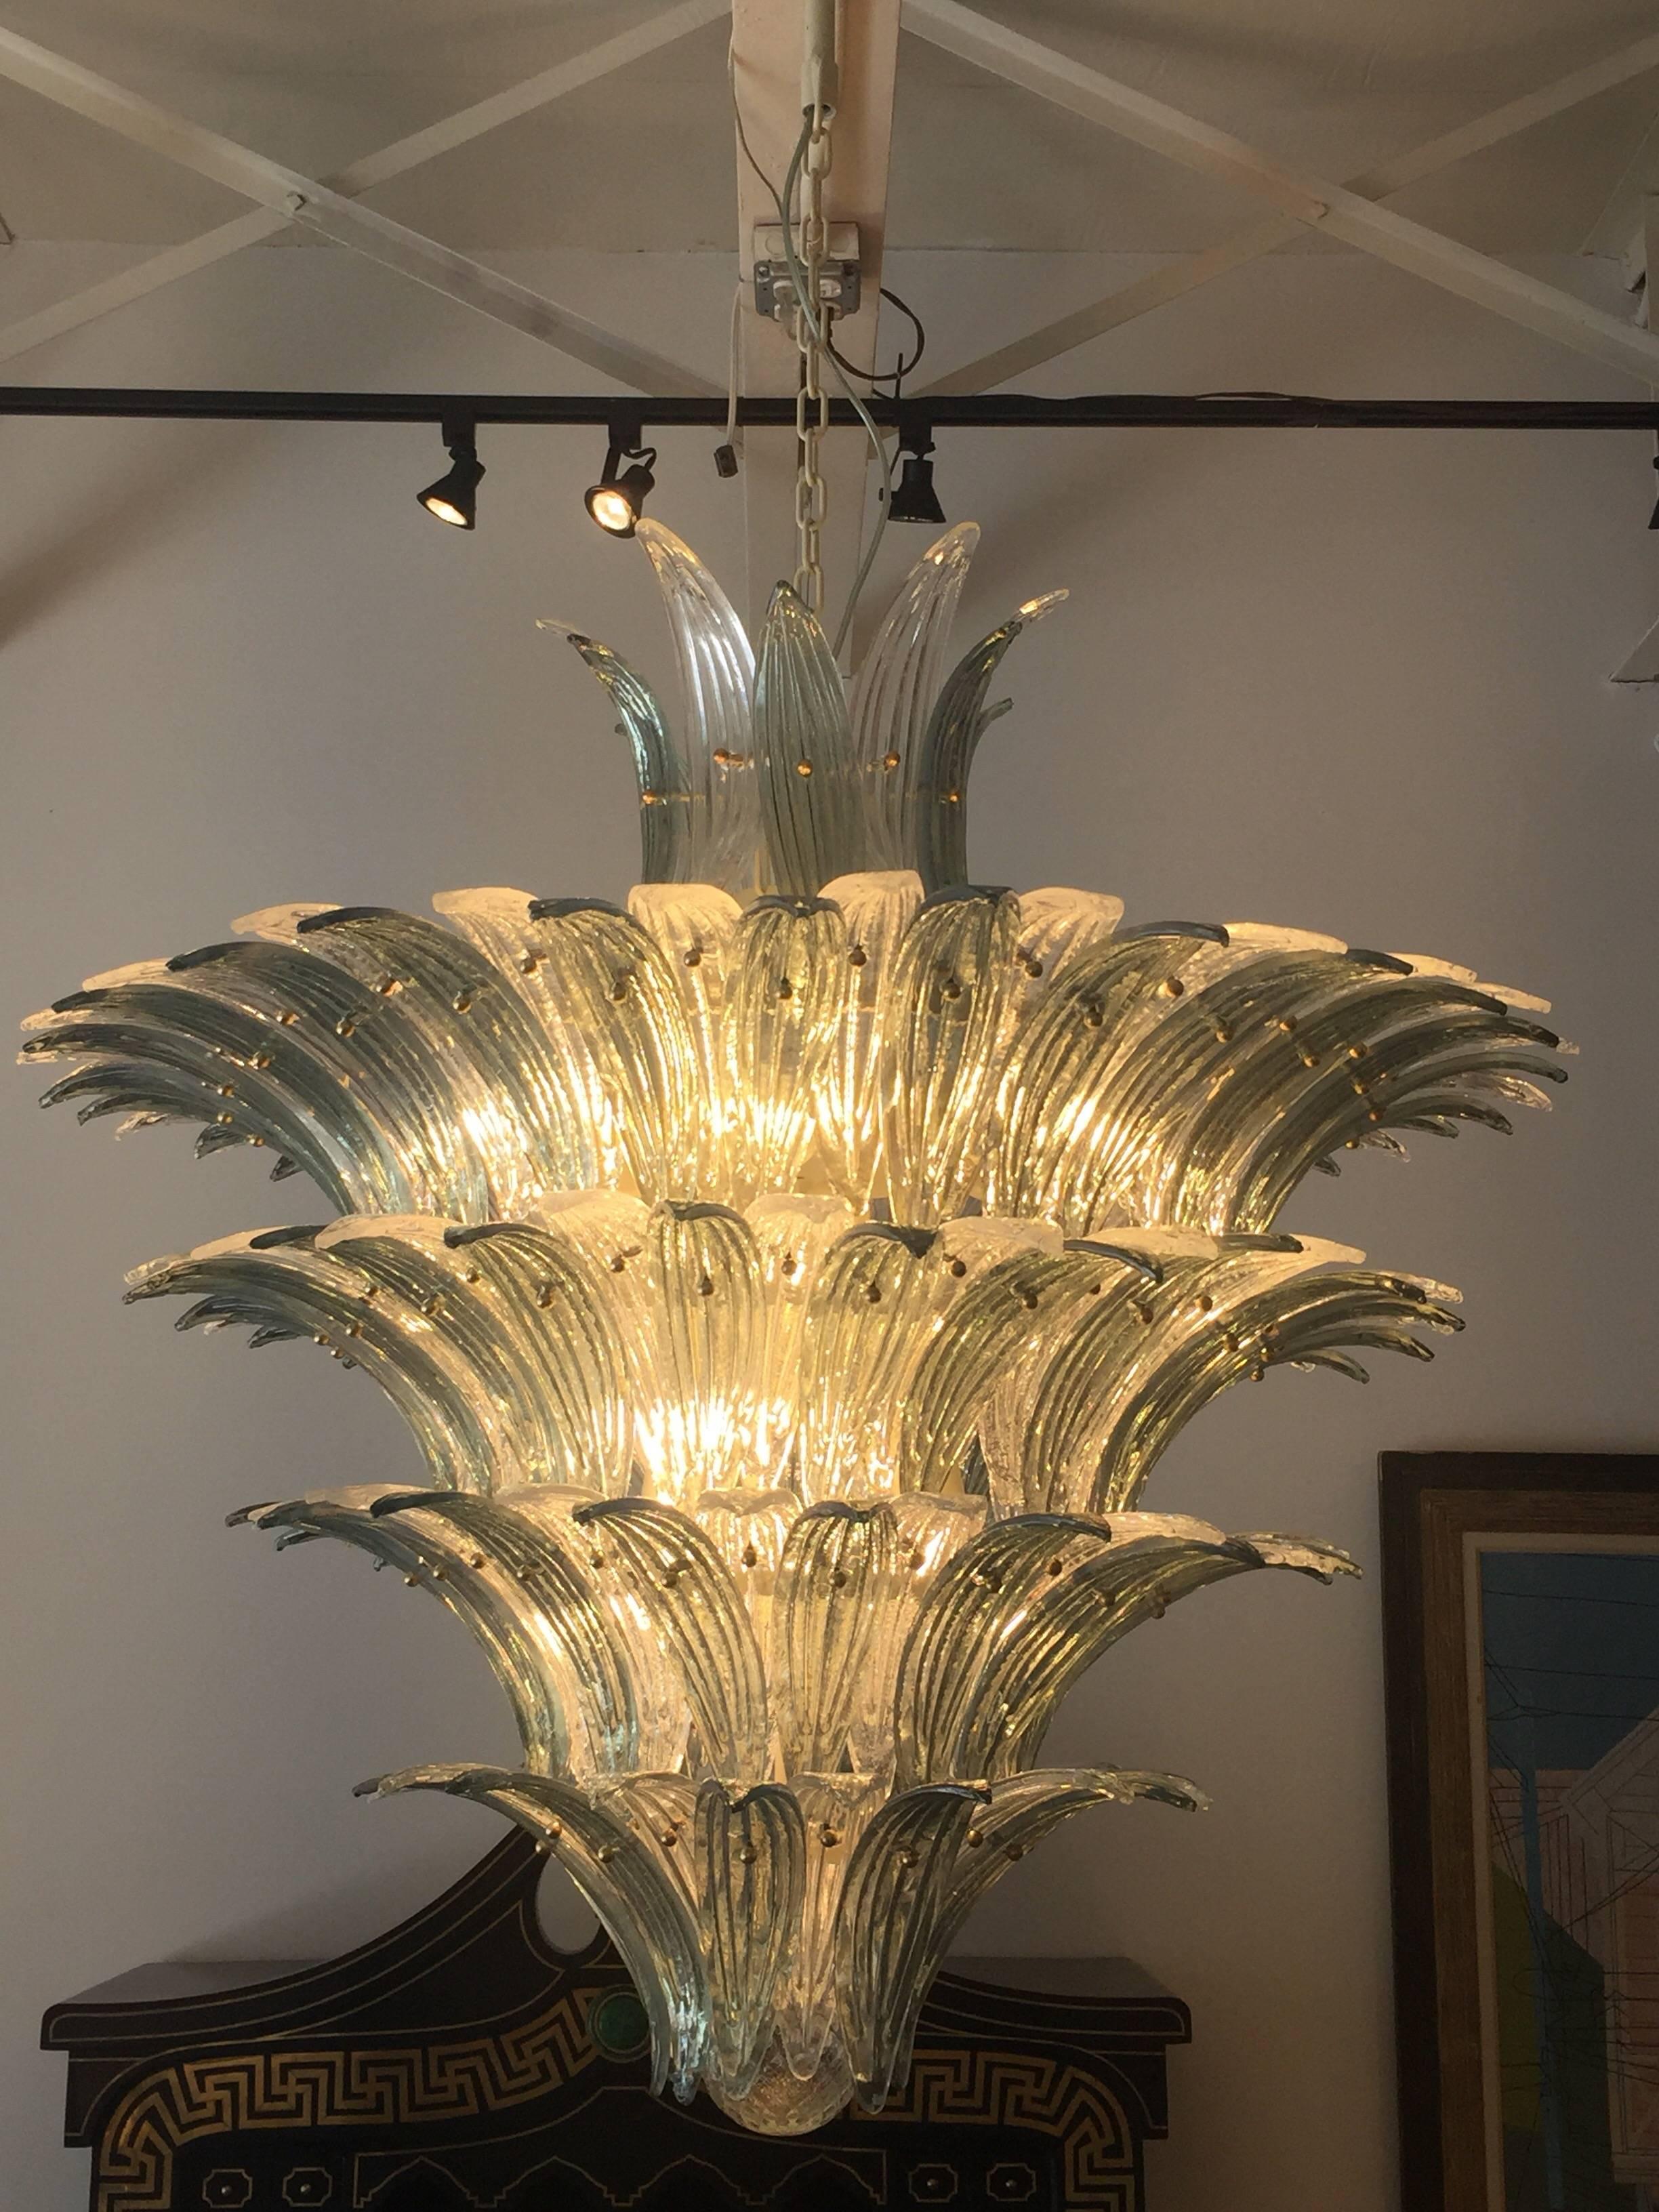 Often attributed to Marius-Ernest Sabino, these new production large-scale chandeliers (four tiers) are interlaced glass palm fronds in clear and grey/blue iridescent tones. We have two identical fixtures if your project requires - sold